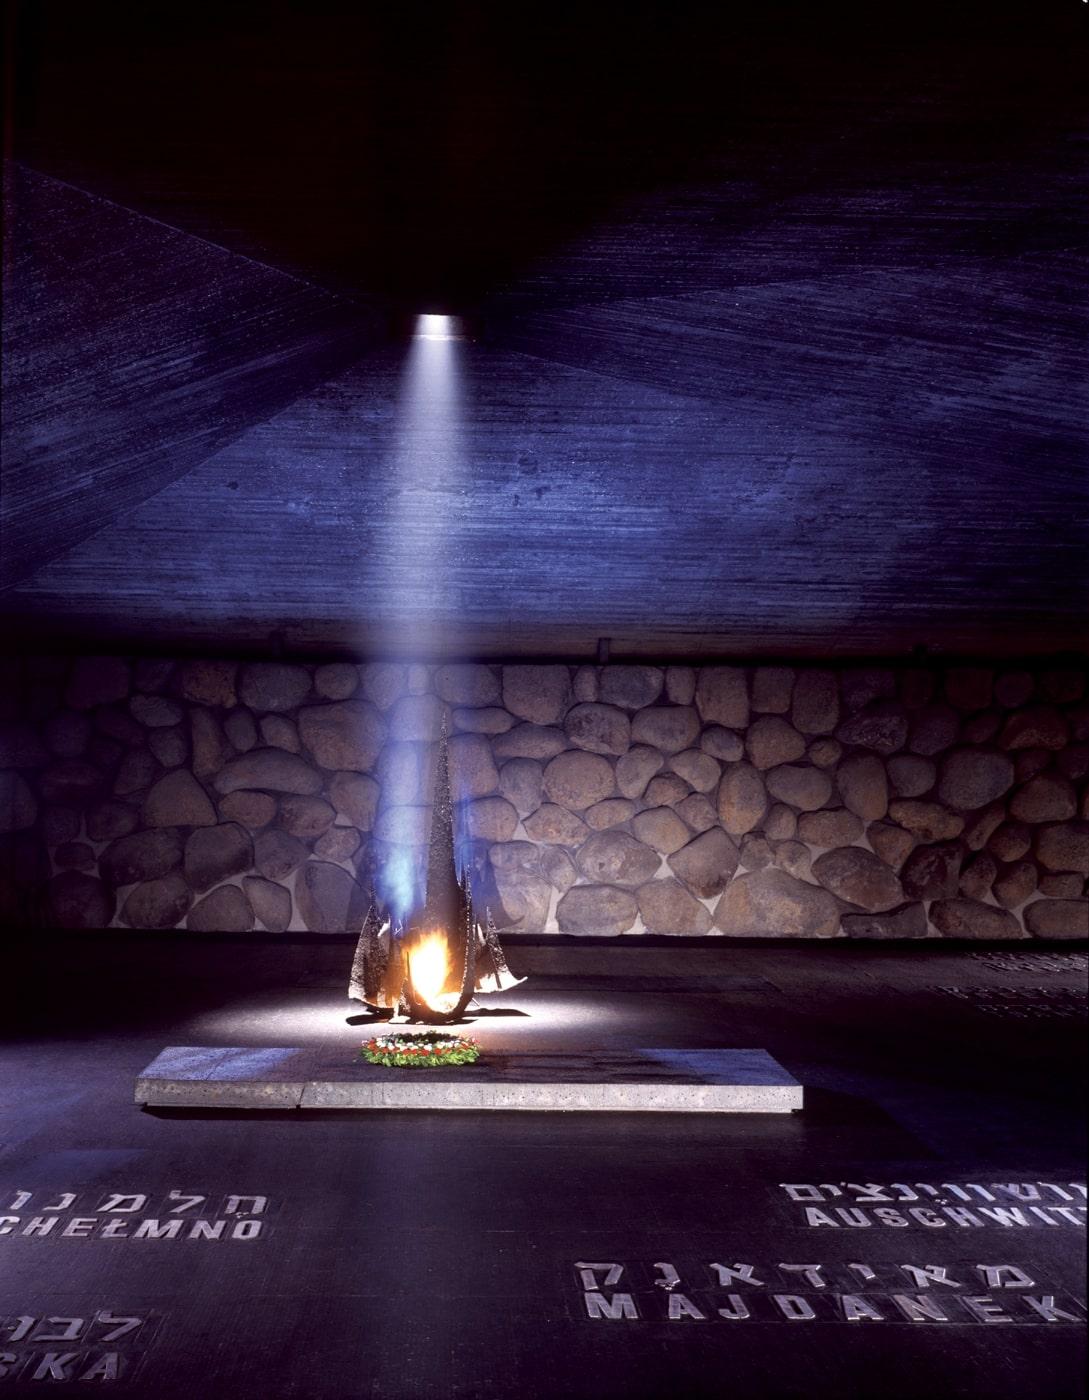 Memorial depicting flame burning from a base and illuminating a wall with an angular roof and basalt walls, with place names in English and Hebrew on the floor.